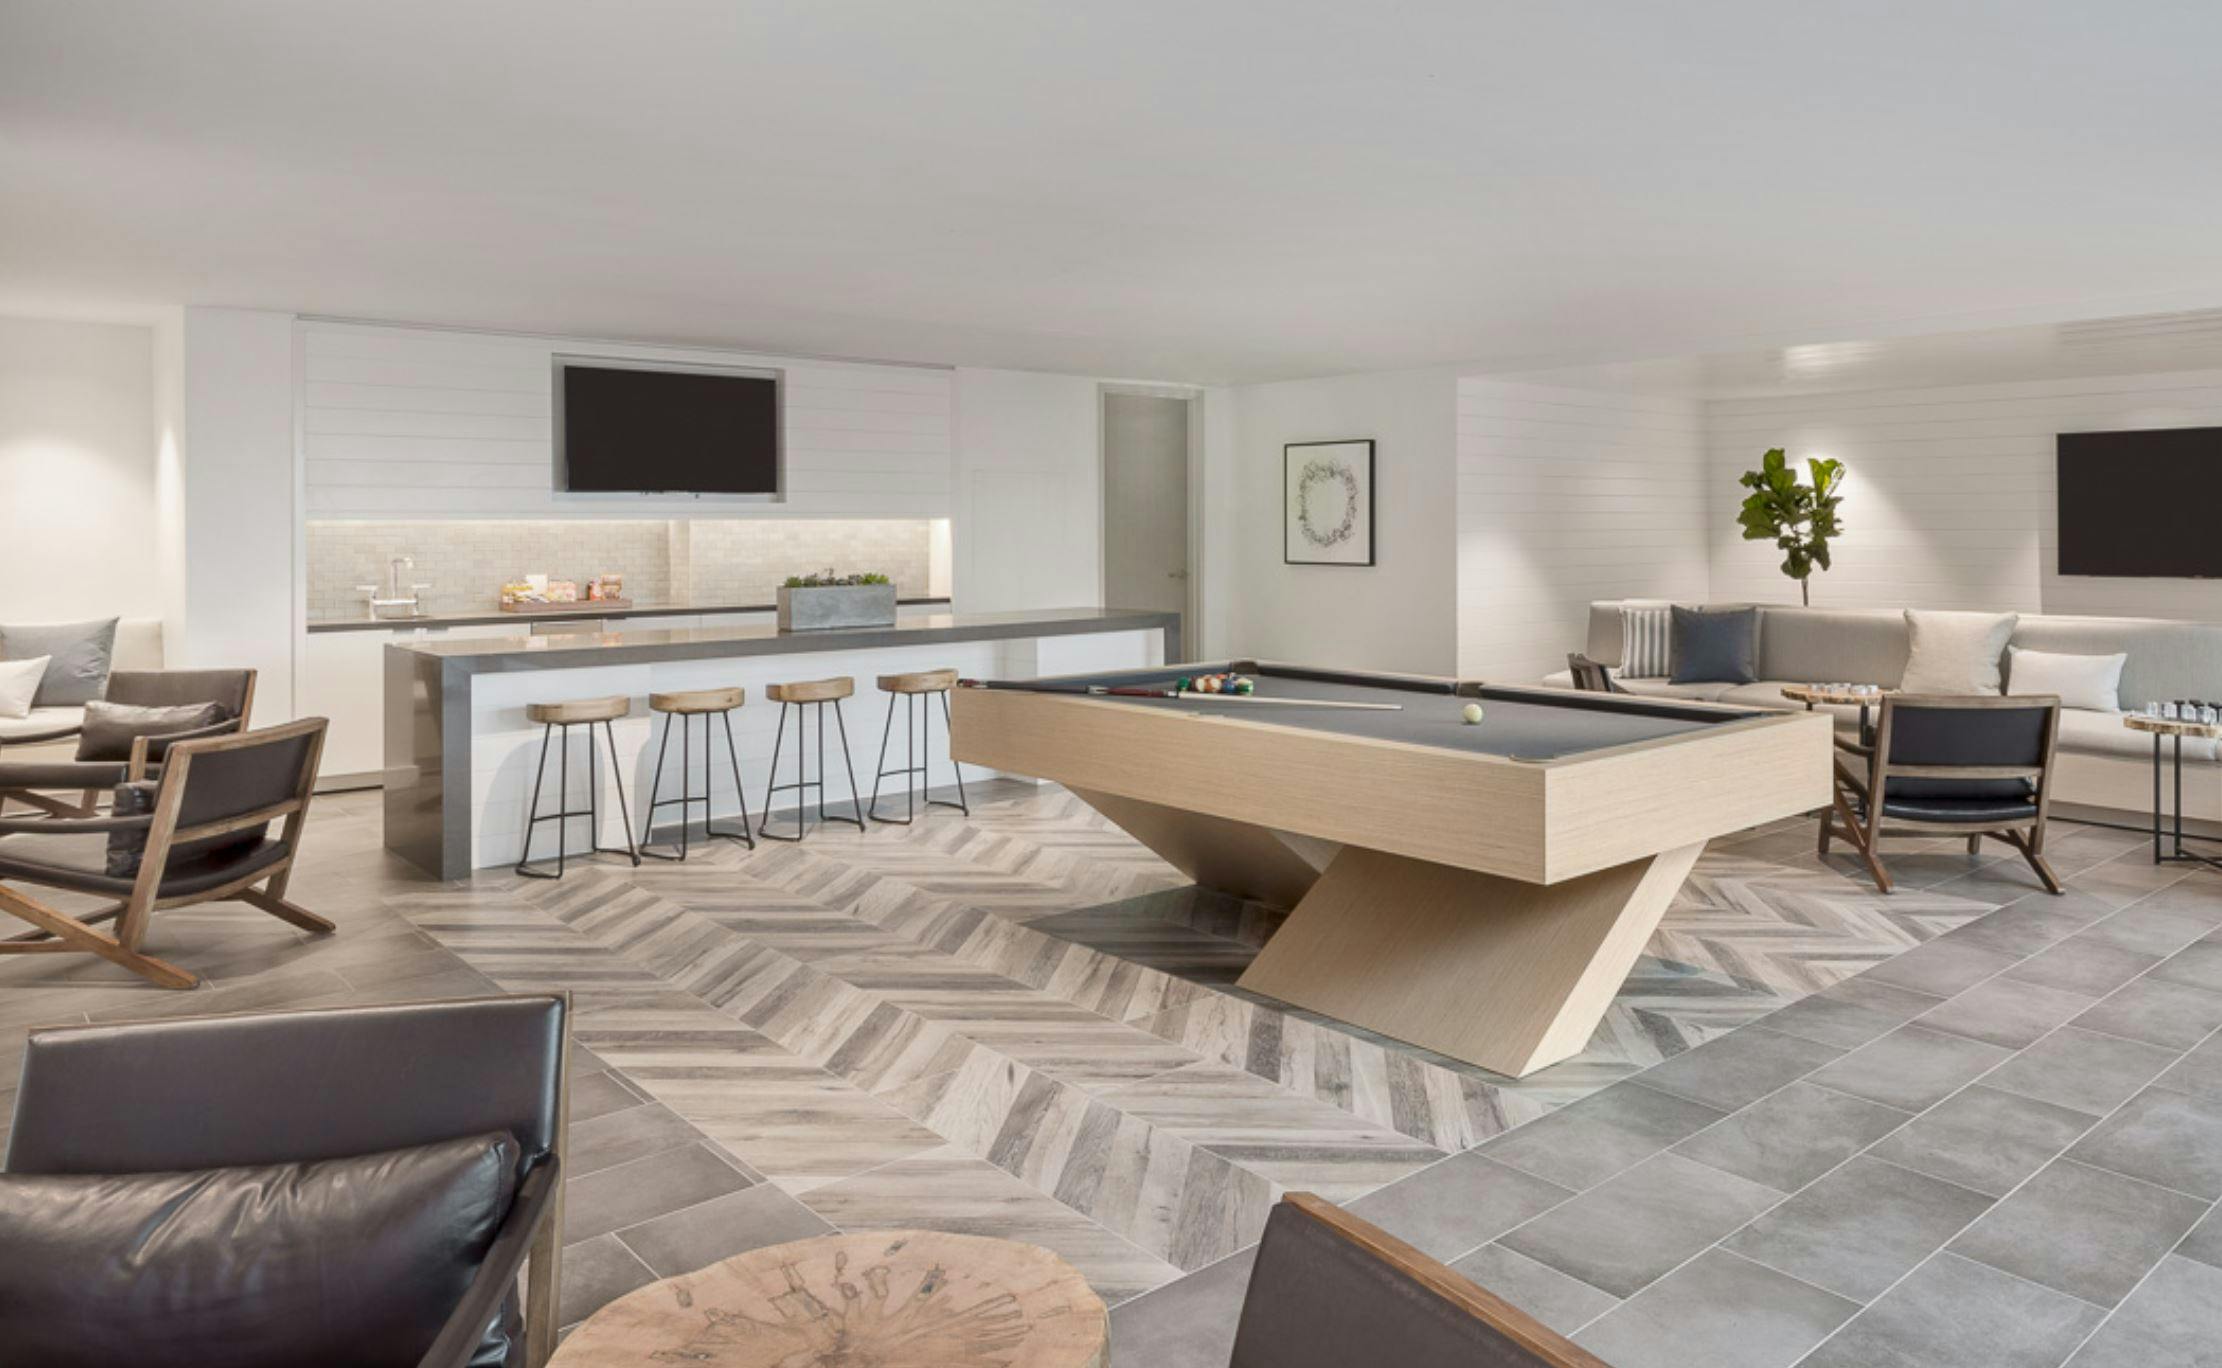 Aside from the outdoor amenities and gym, One Mission Bay also offers a game room that is perfect for hang outs and entertainment, as well as private dining rooms, a chef's kitchen, and more. 